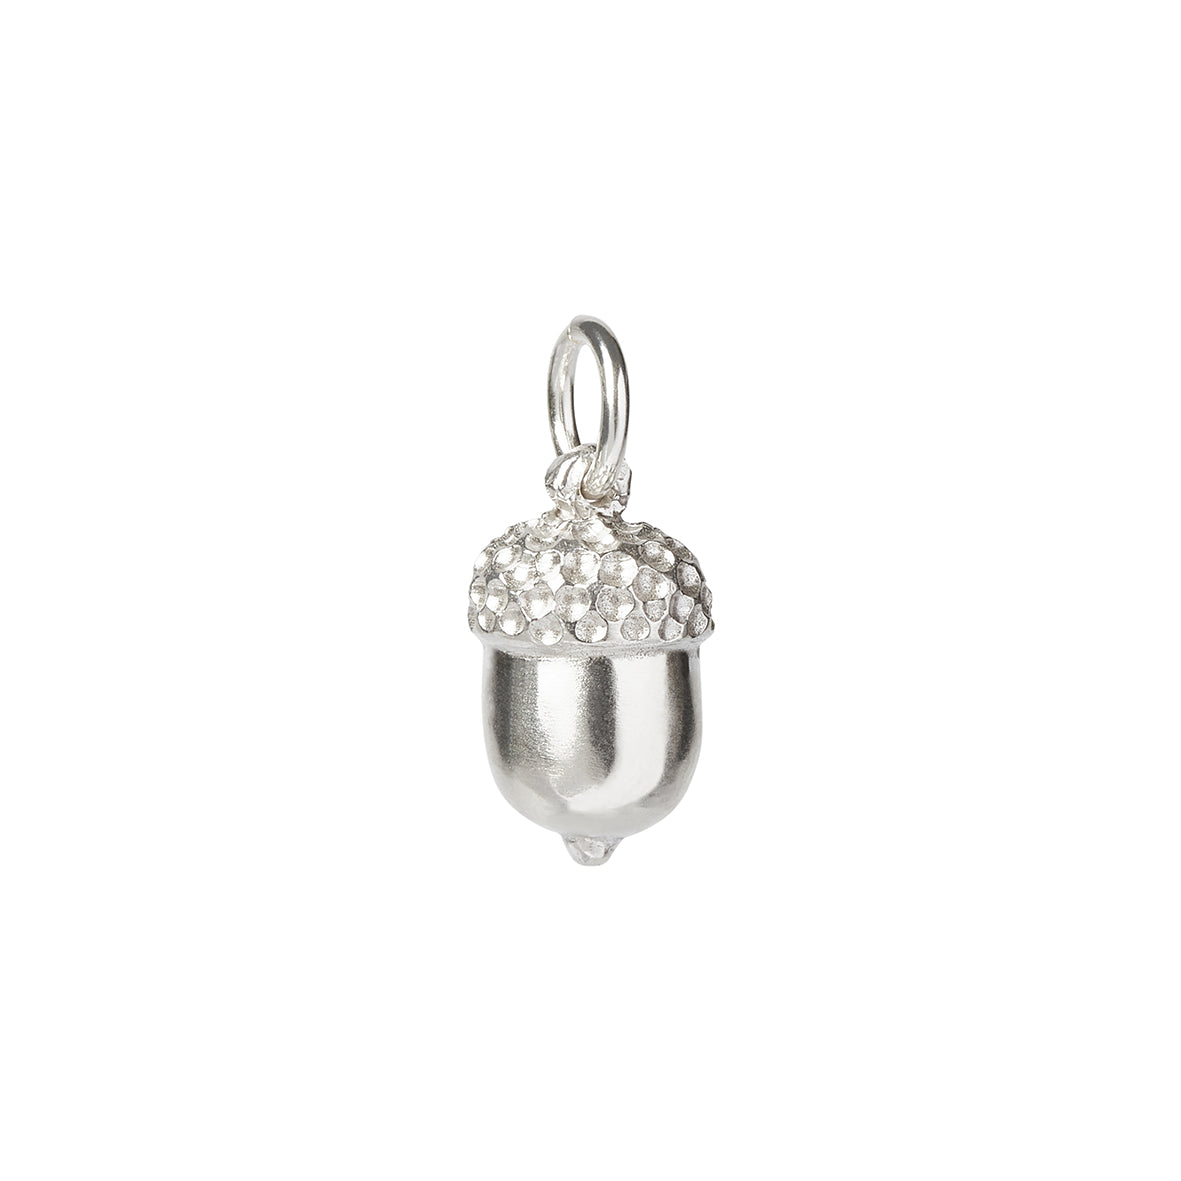 A solid sterling silver acorn with a textured top and jump ring on a white background. Made by Kirsty Taylor Jewellery in Corbridge Northumberland